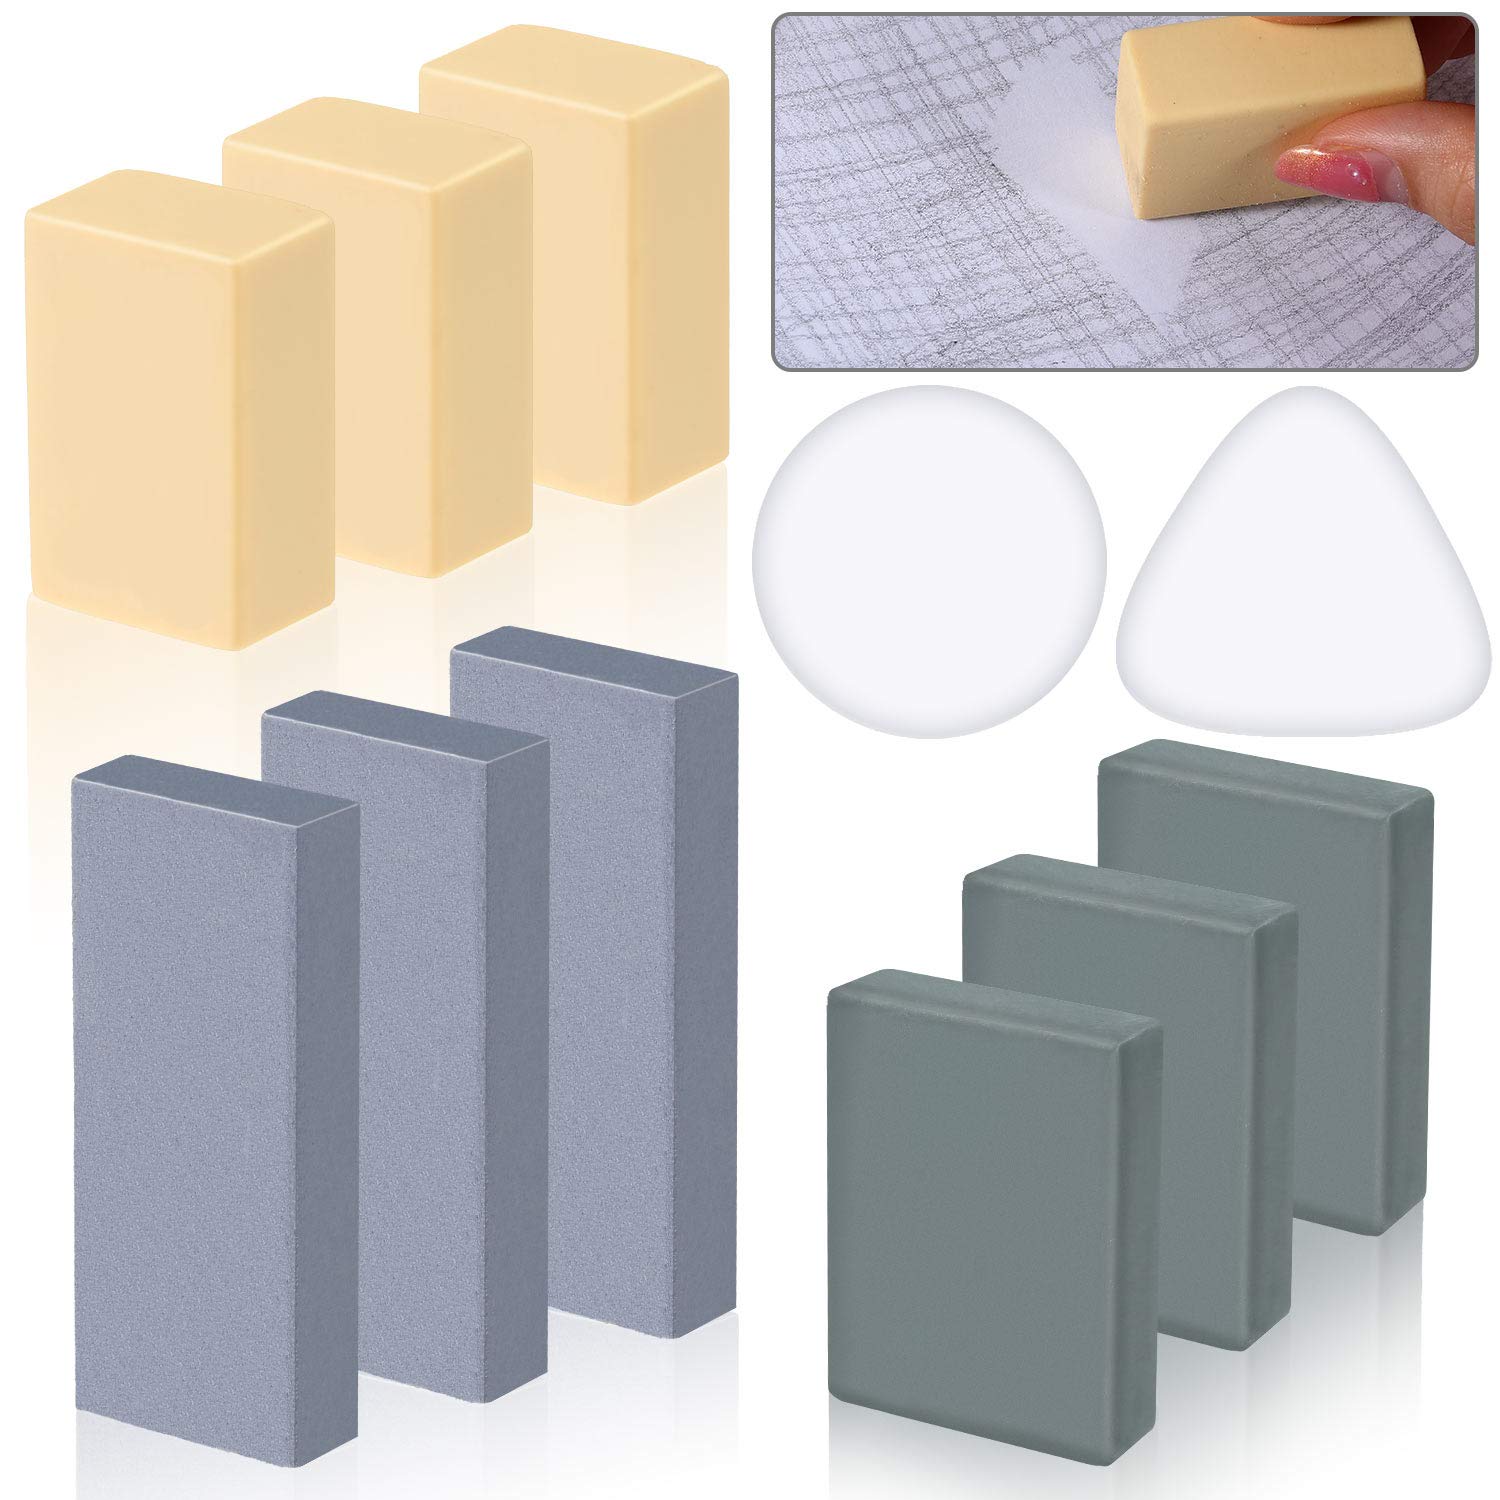 Outus 11 Pieces Gum Erasers For Artists Sketching, Kneaded Art